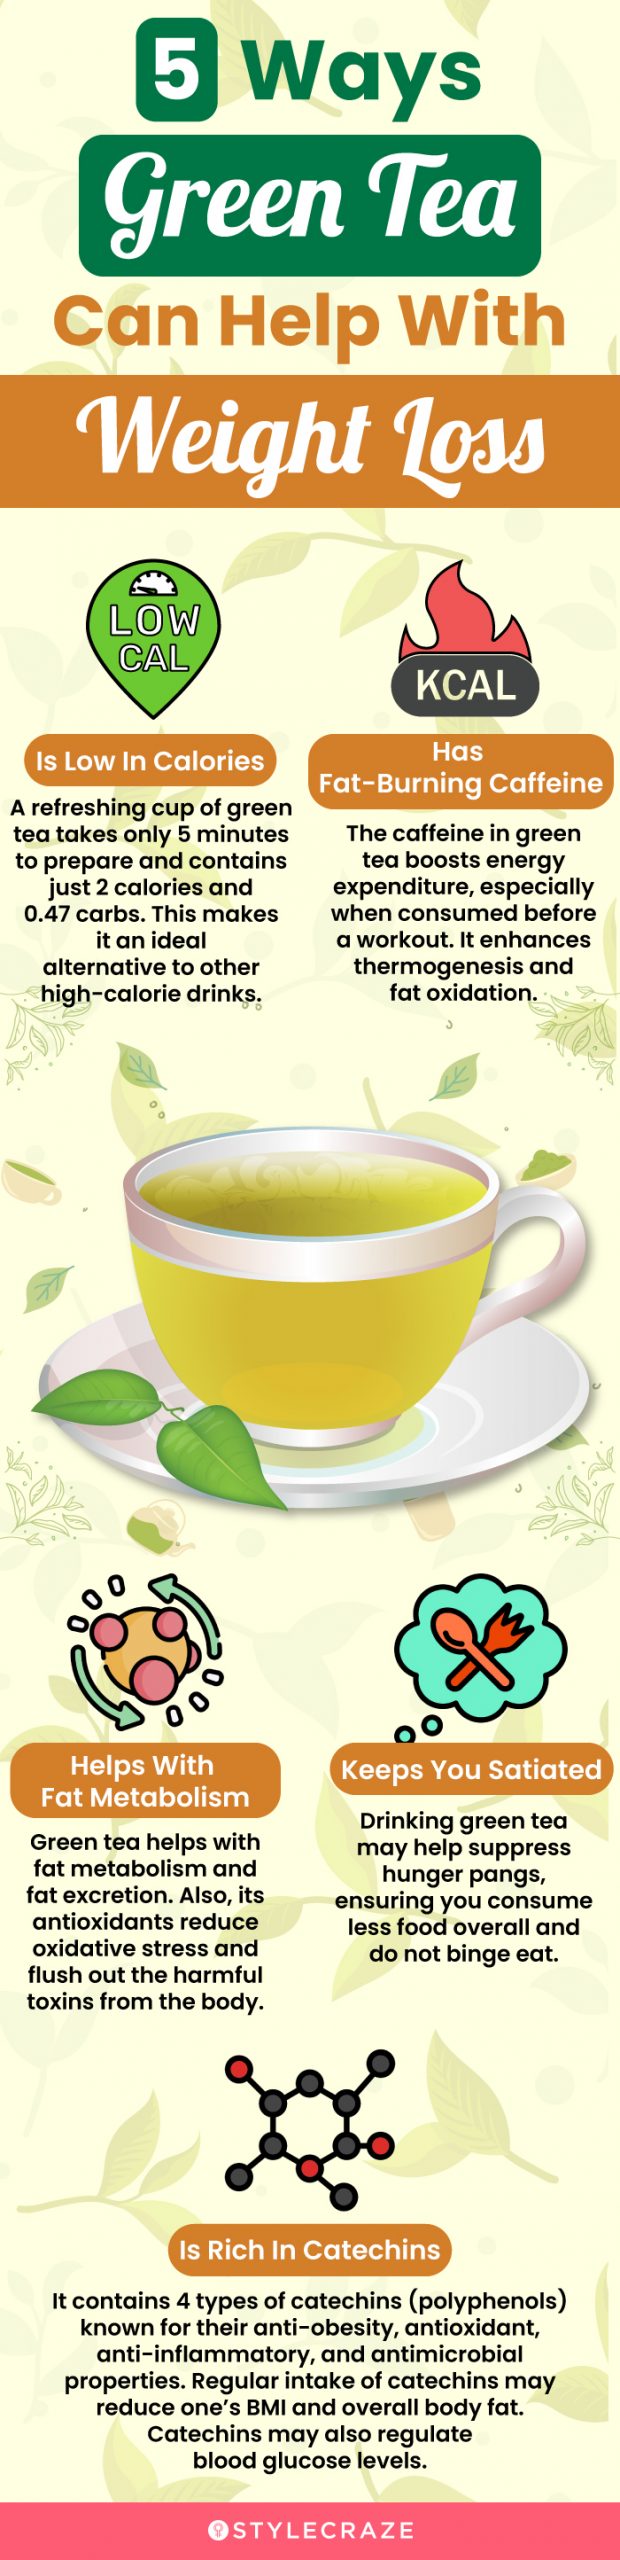 How Green Tea Helps Promote Weight Loss